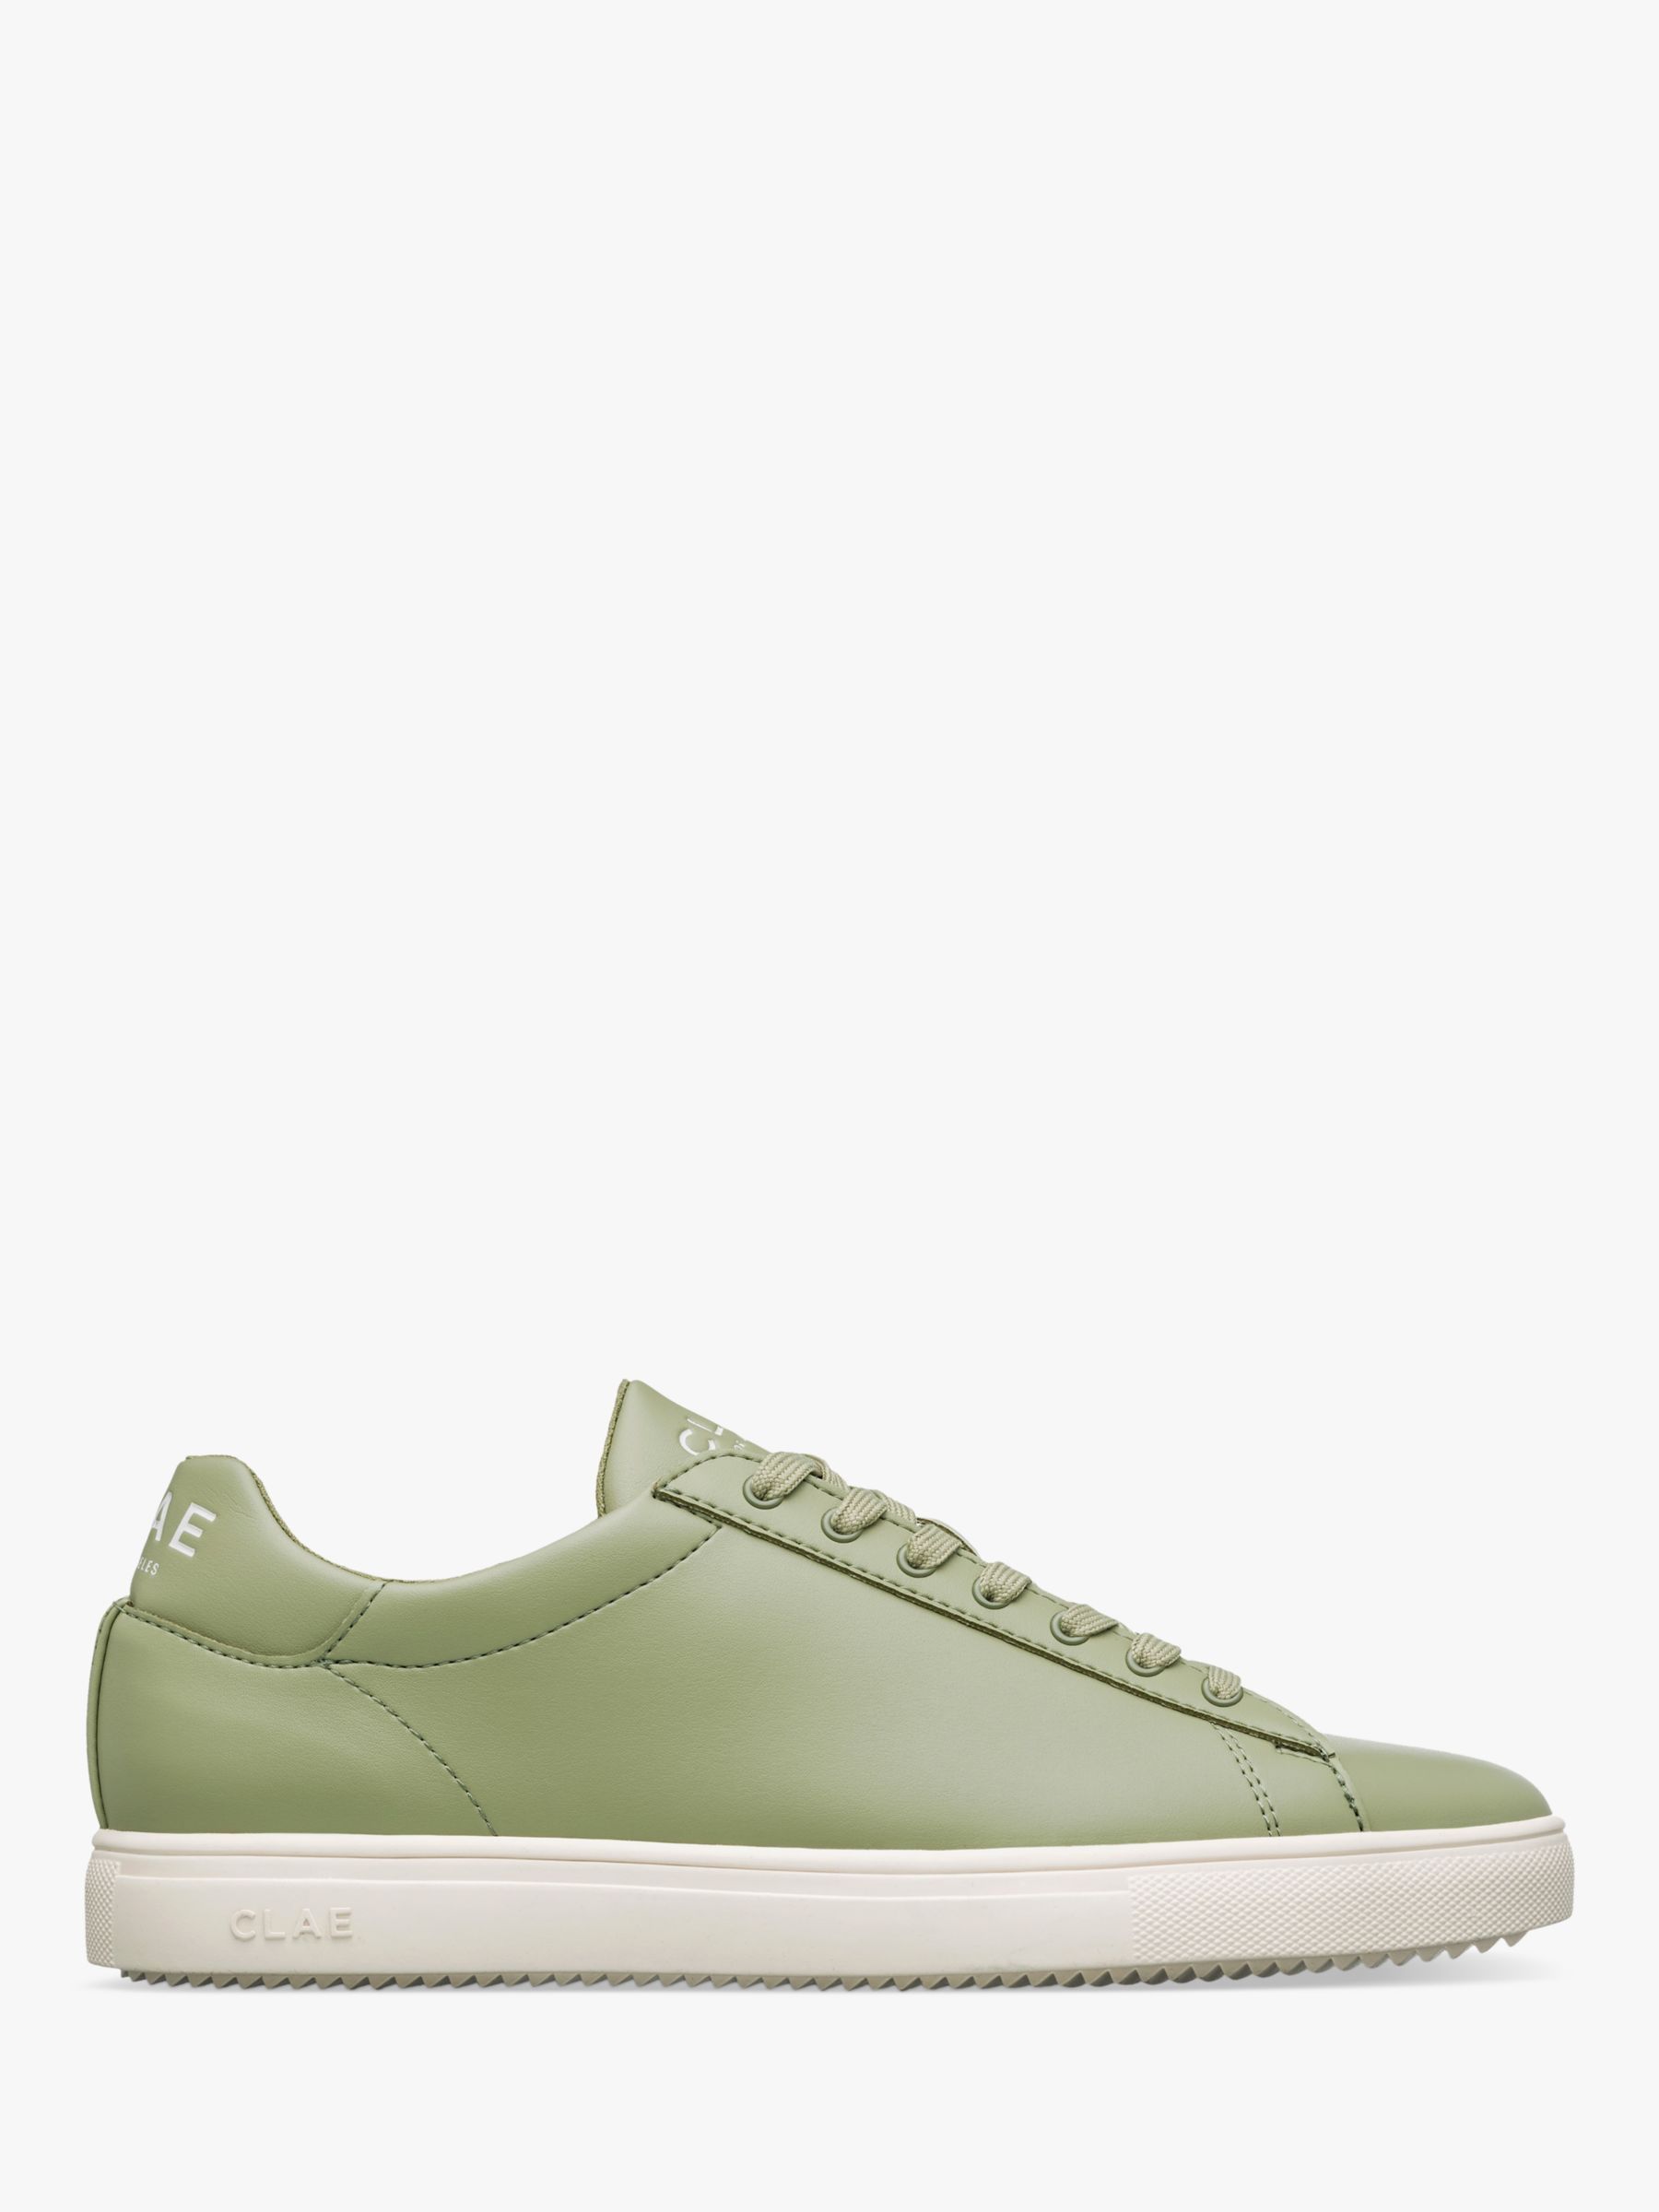 CLAE Bradley Cactus Lace Up Trainers, Sage at John Lewis & Partners